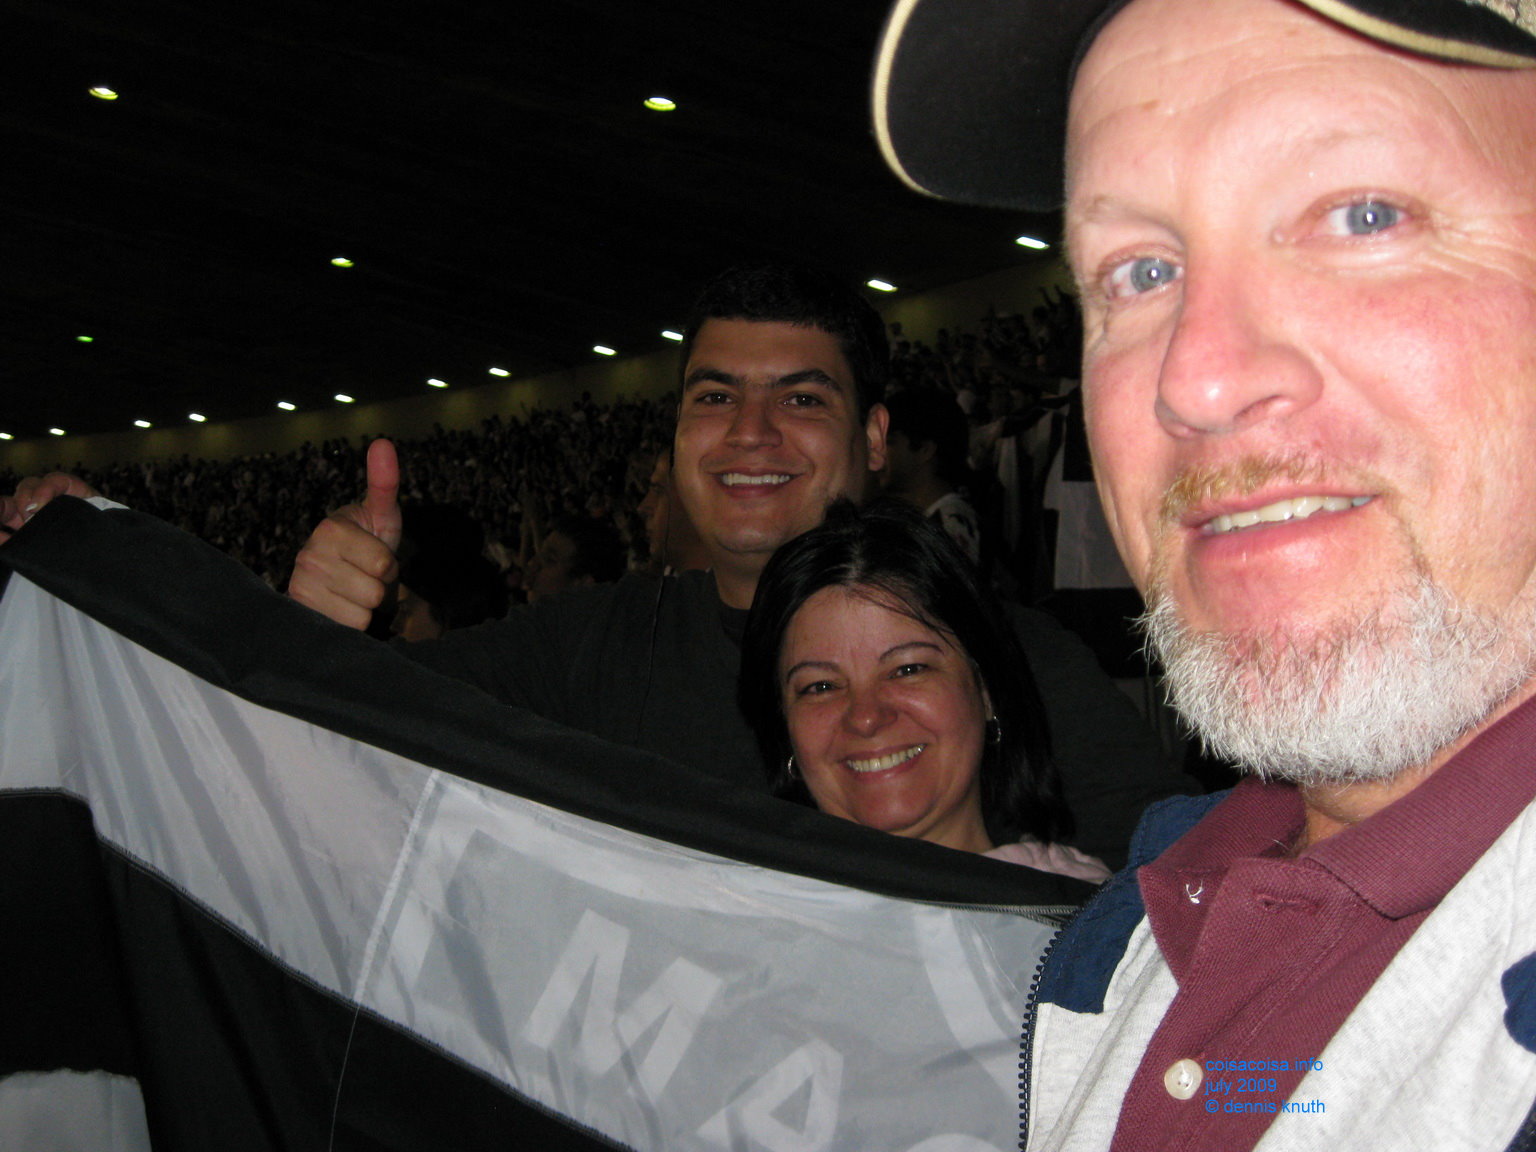 Gary Saxe of Durand with Helenice and Dudu at a Brazil Futbol game